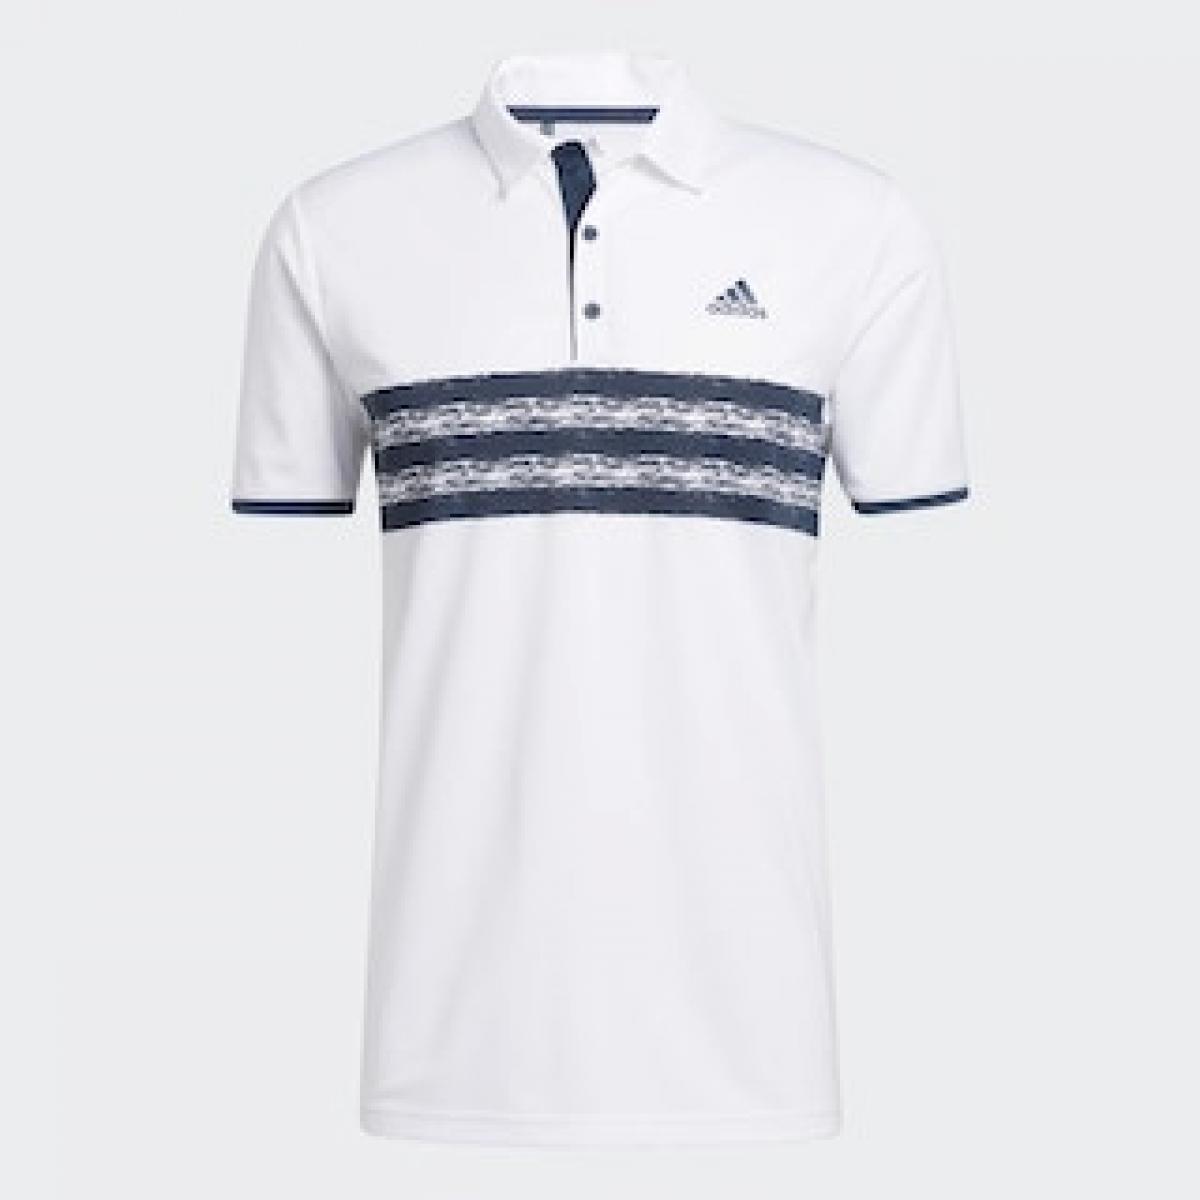 The five BEST adidas Golf shirts for 2021